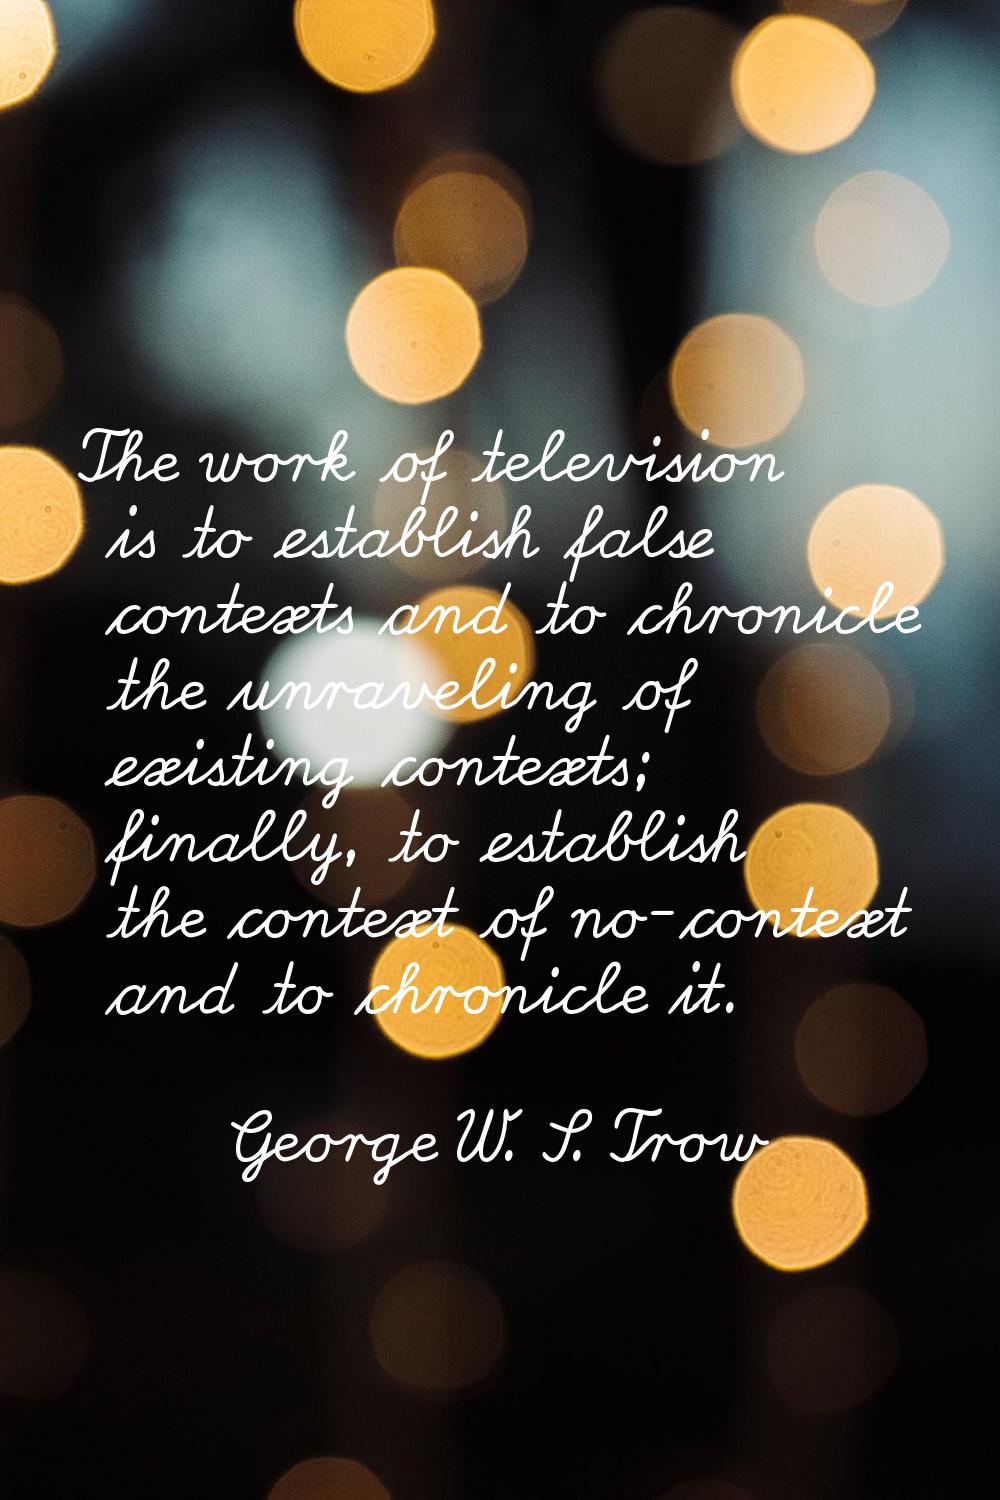 The work of television is to establish false contexts and to chronicle the unraveling of existing c